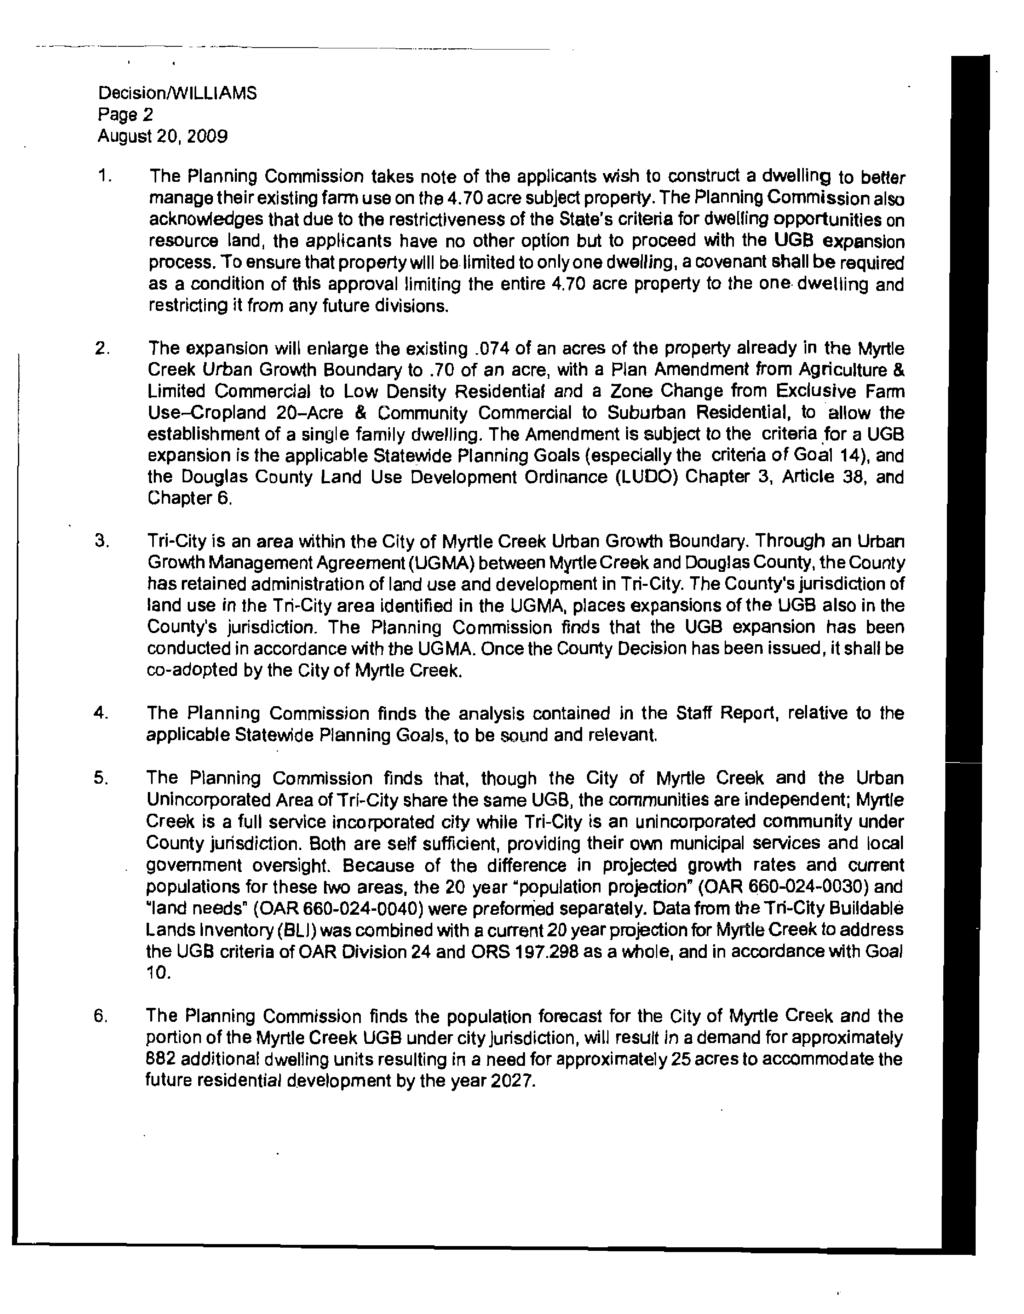 Decision/WILLIAMS Page 2 August 20, 2009 1. The Planning Commission takes note of the applicants wish to construct a dwelling to better manage their existing farm use on the 4.